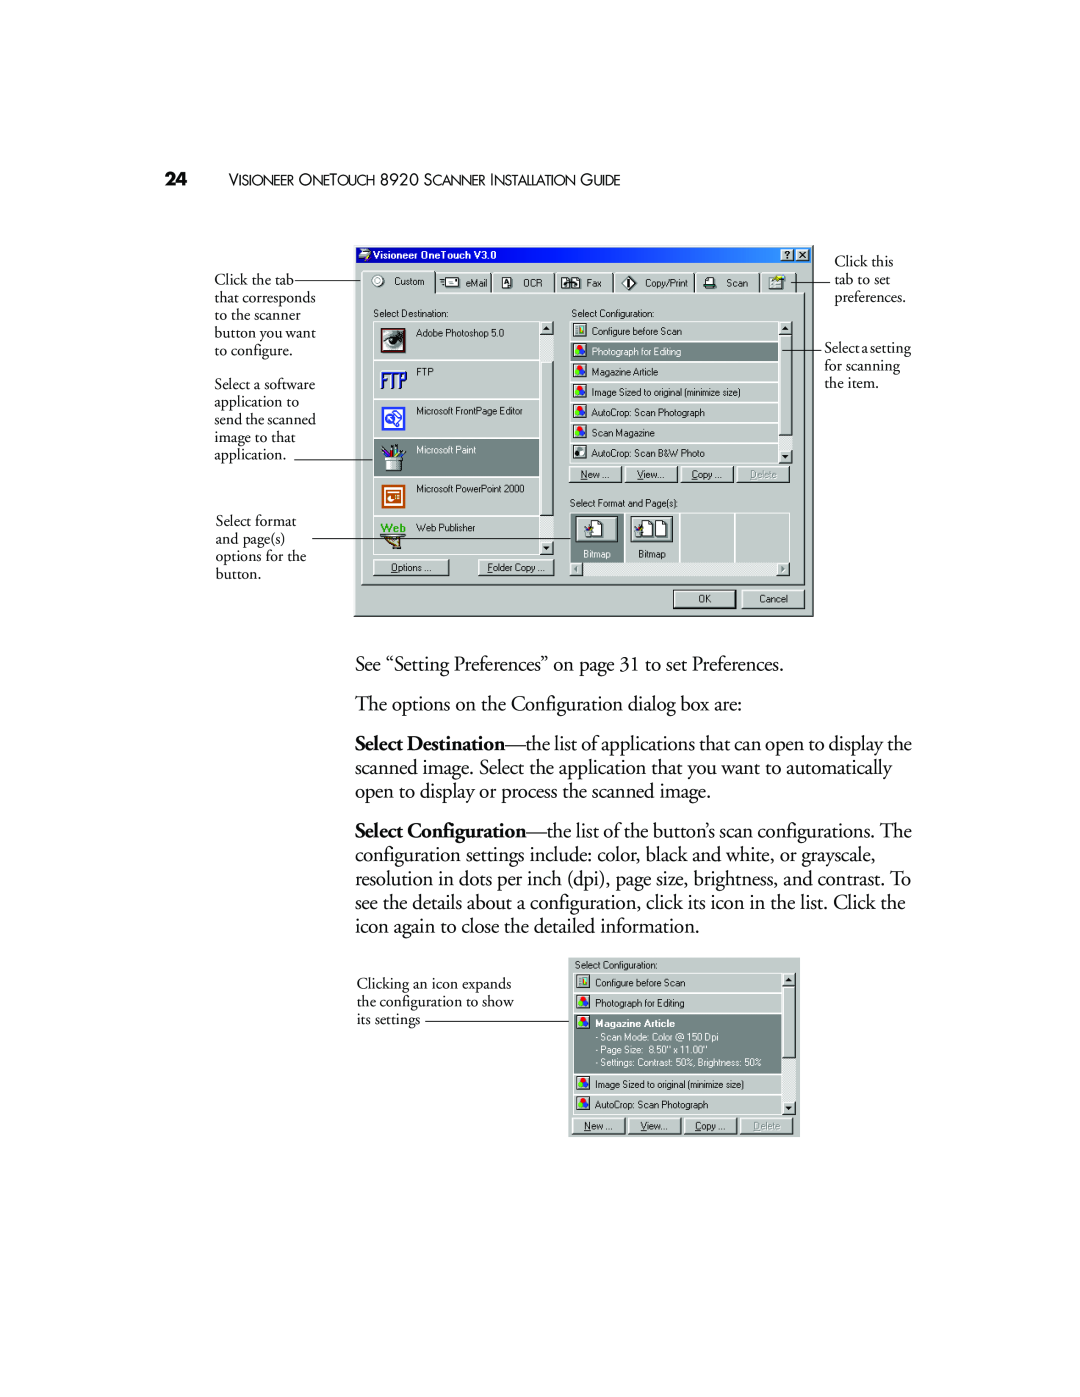 Visioneer 8920 manual See “Setting Preferences” on page 31 to set Preferences 